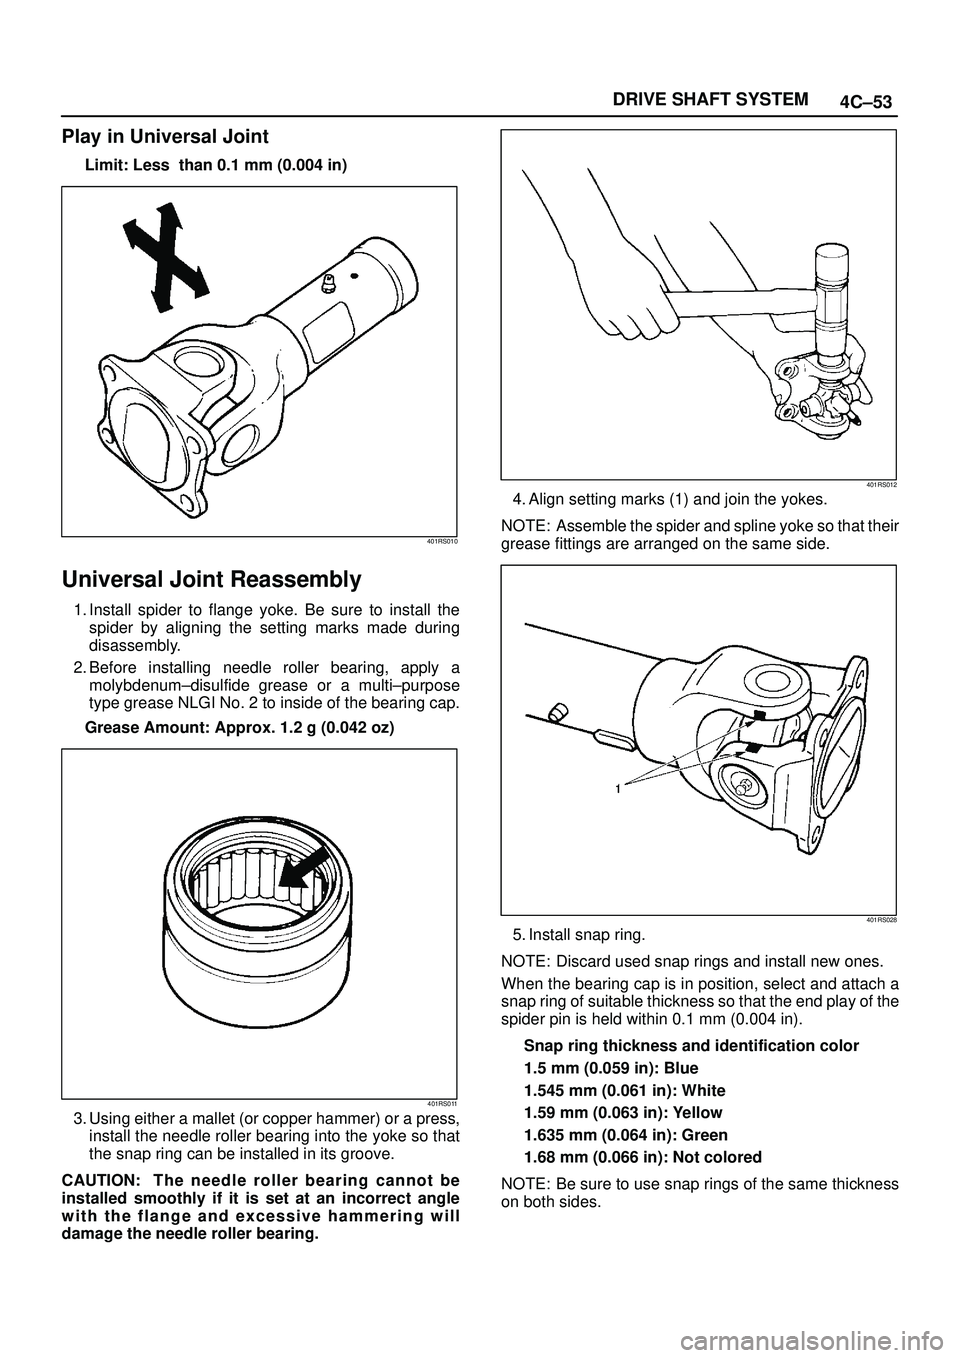 ISUZU TROOPER 1998  Service Repair Manual 4C±53 DRIVE SHAFT SYSTEM
Play in Universal Joint
Limit: Less  than 0.1 mm (0.004 in)
401RS010
Universal Joint Reassembly
1. Install spider to flange yoke. Be sure to install the
spider by aligning th